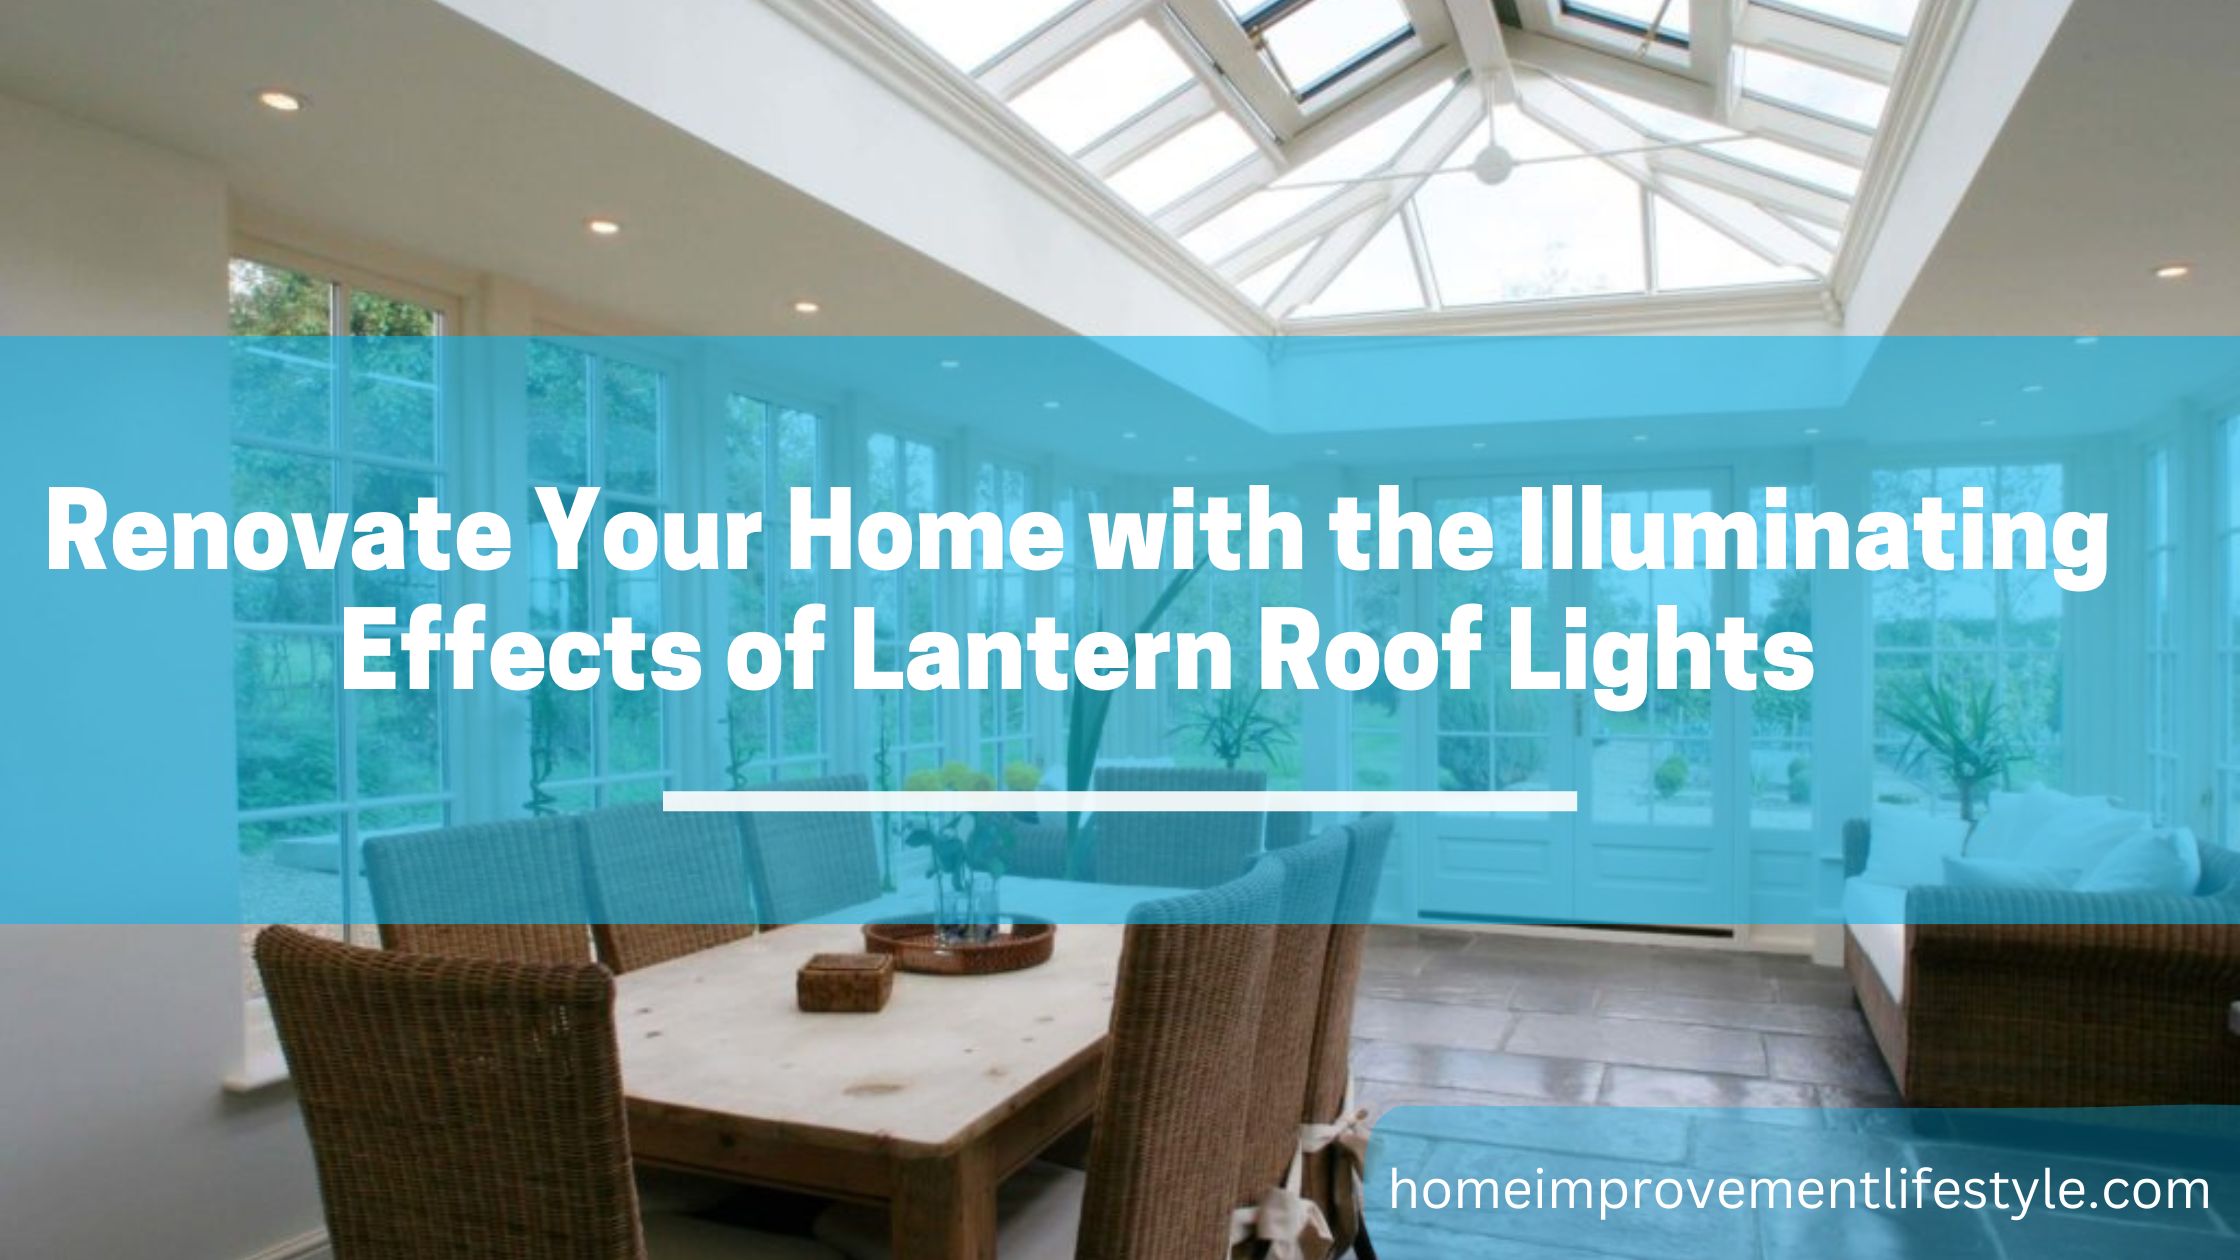 Renovate Your Home with the Illuminating Effects of Lantern Roof Lights